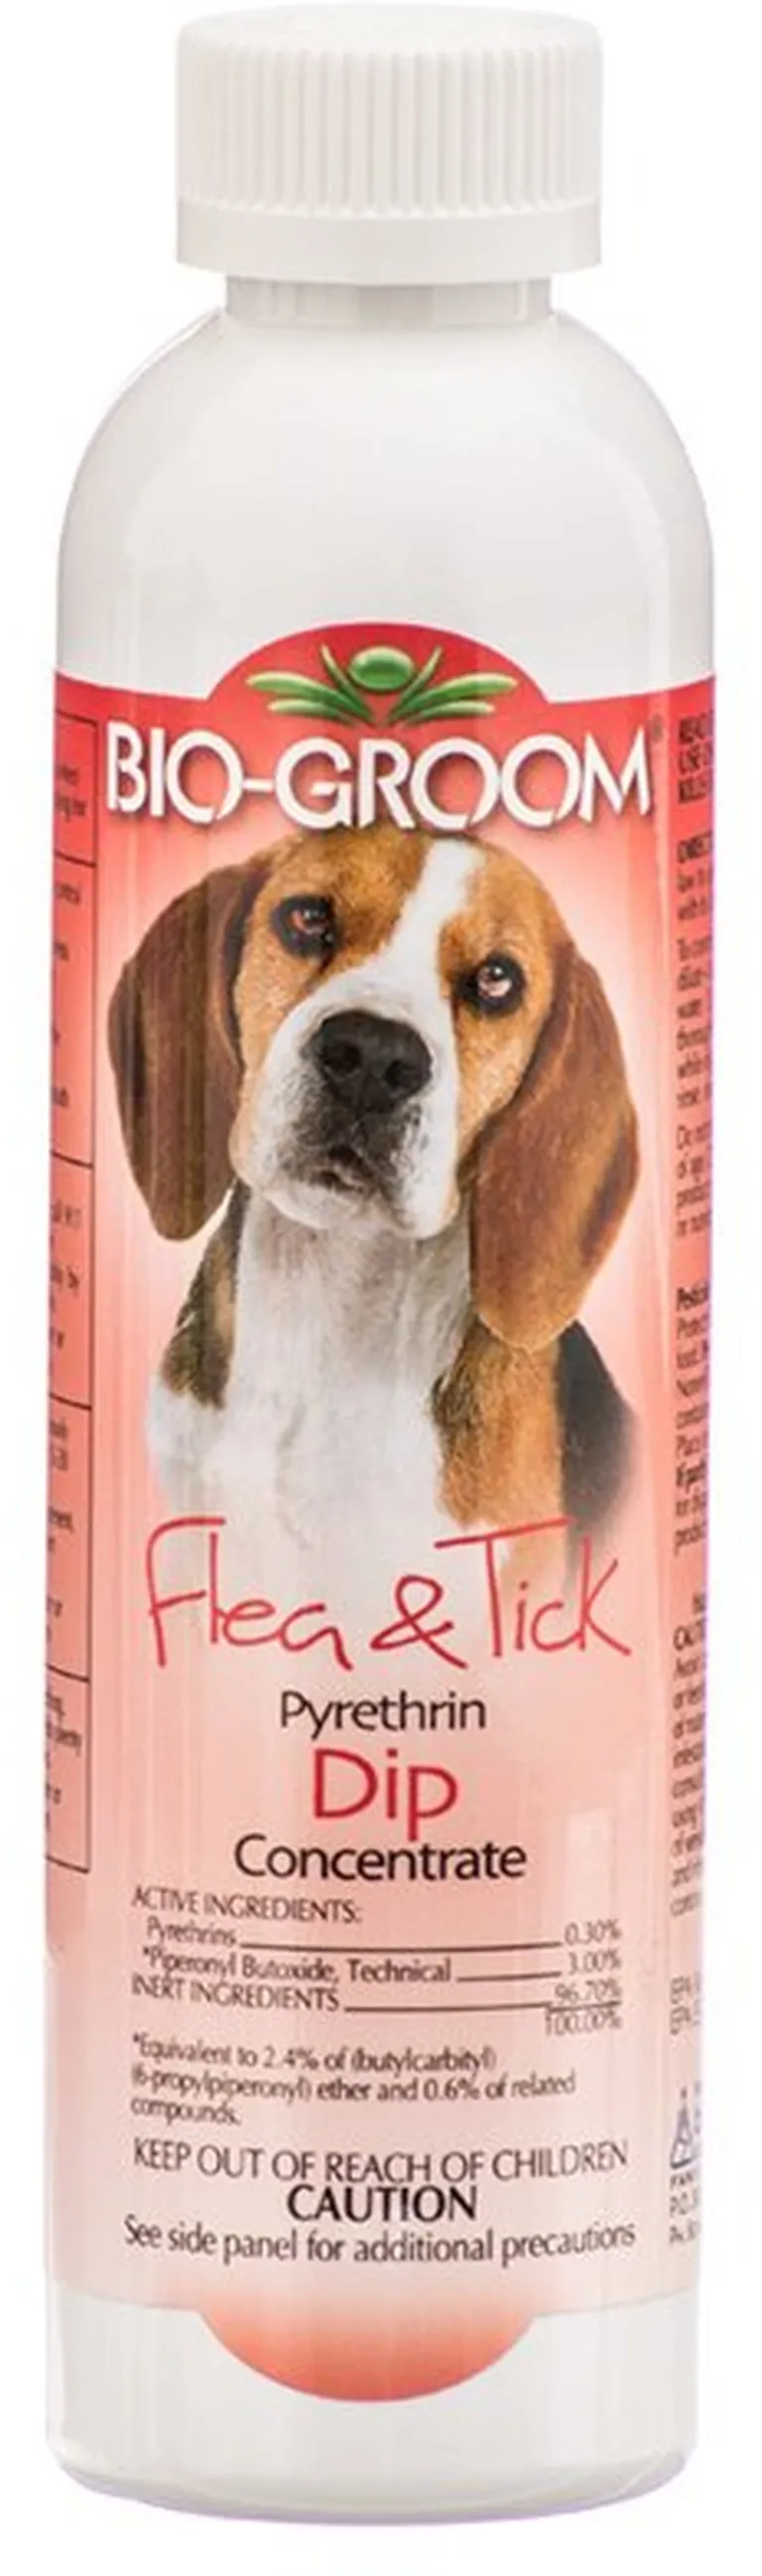 Bio Groom Flea and Tick Pyrethrin Dip Concentrate Photo 2